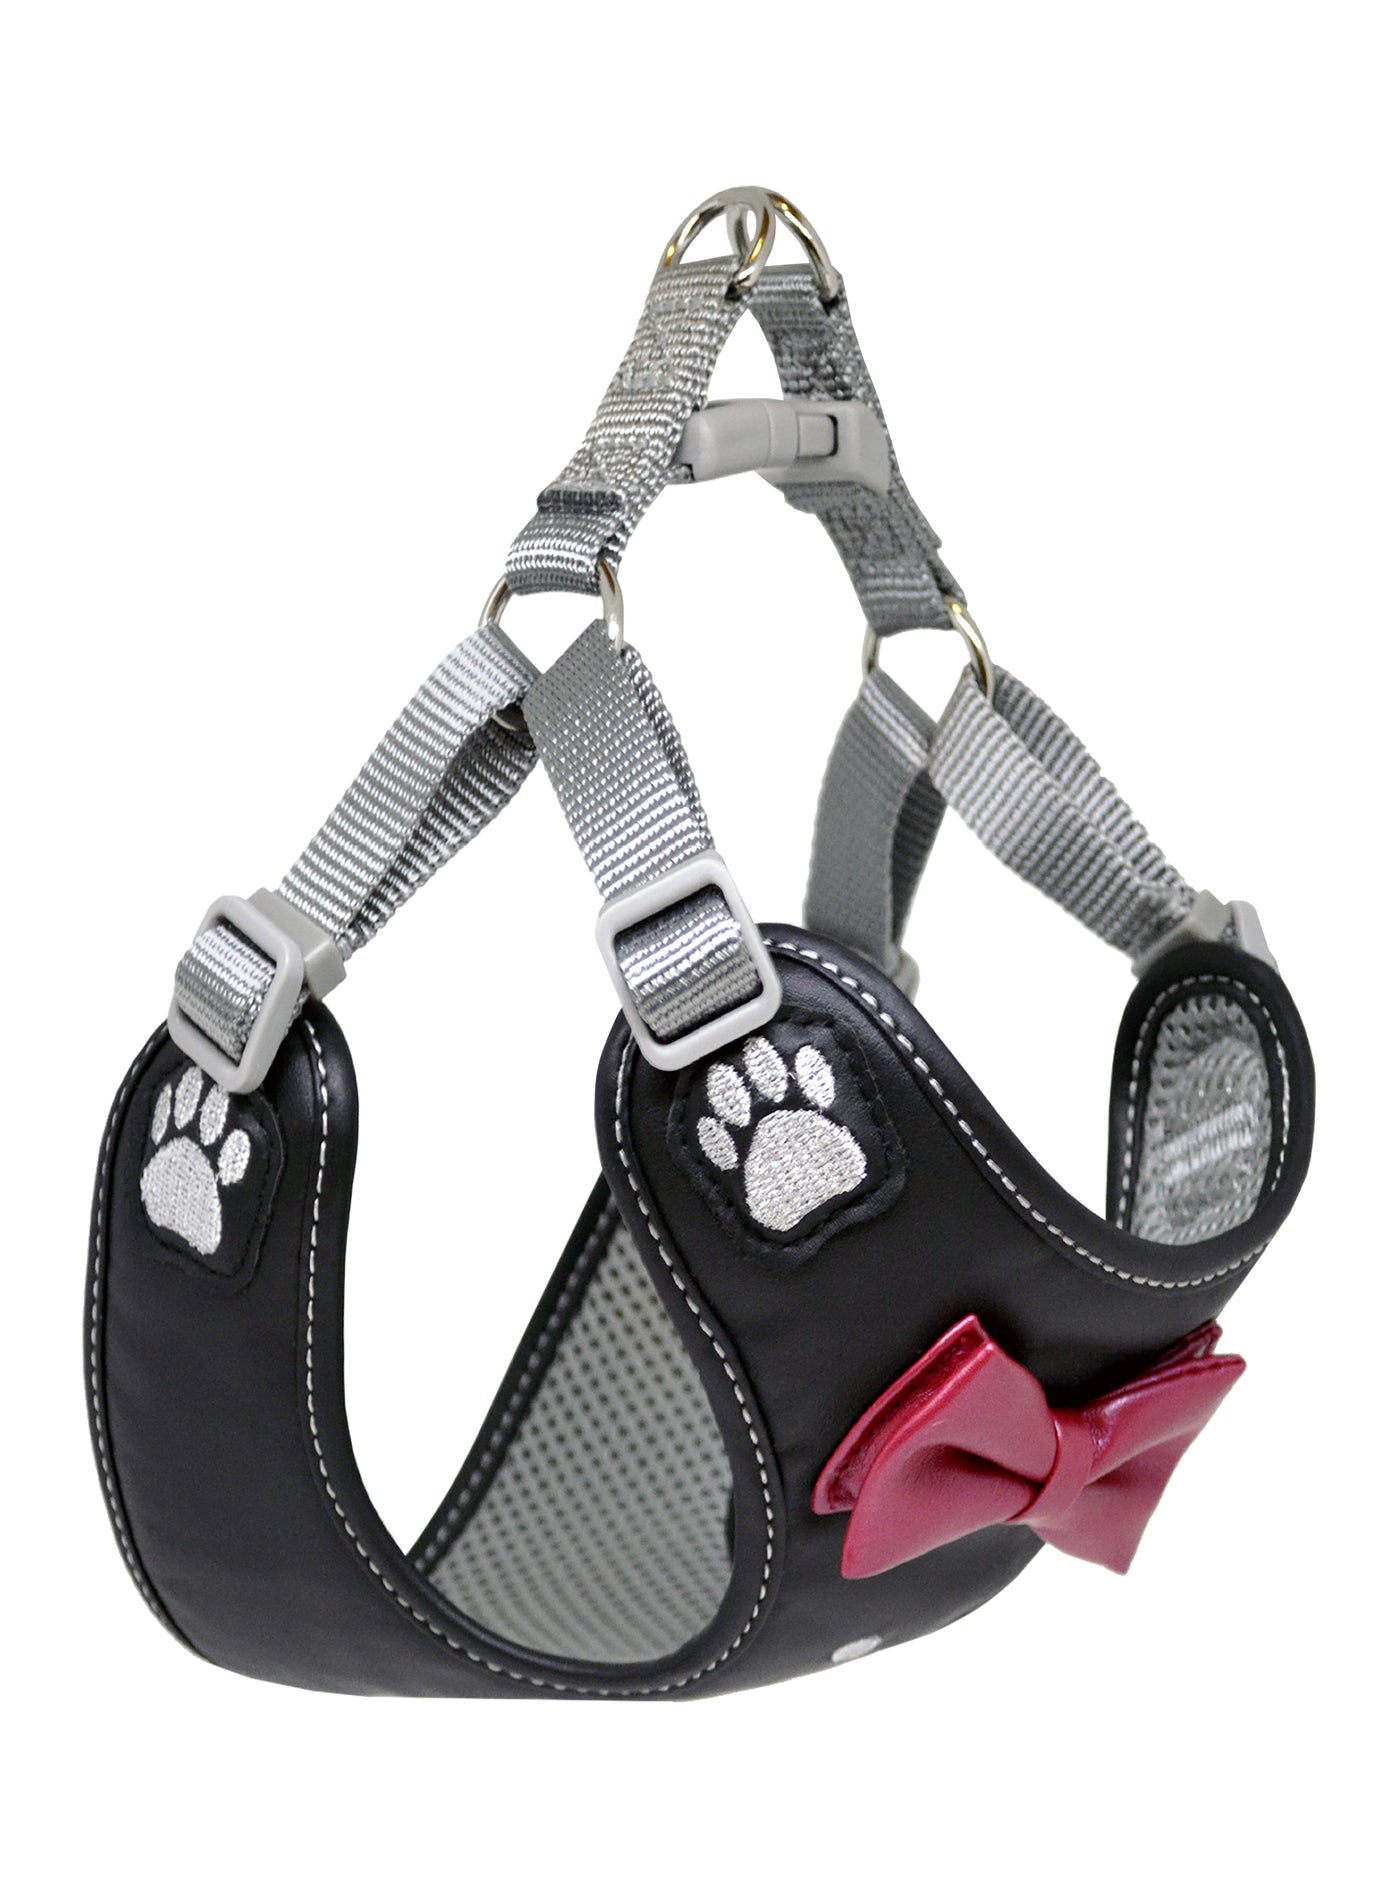 Pretty Paw Harness - James Bond - Dashing Dawgs Grooming and Boutique 